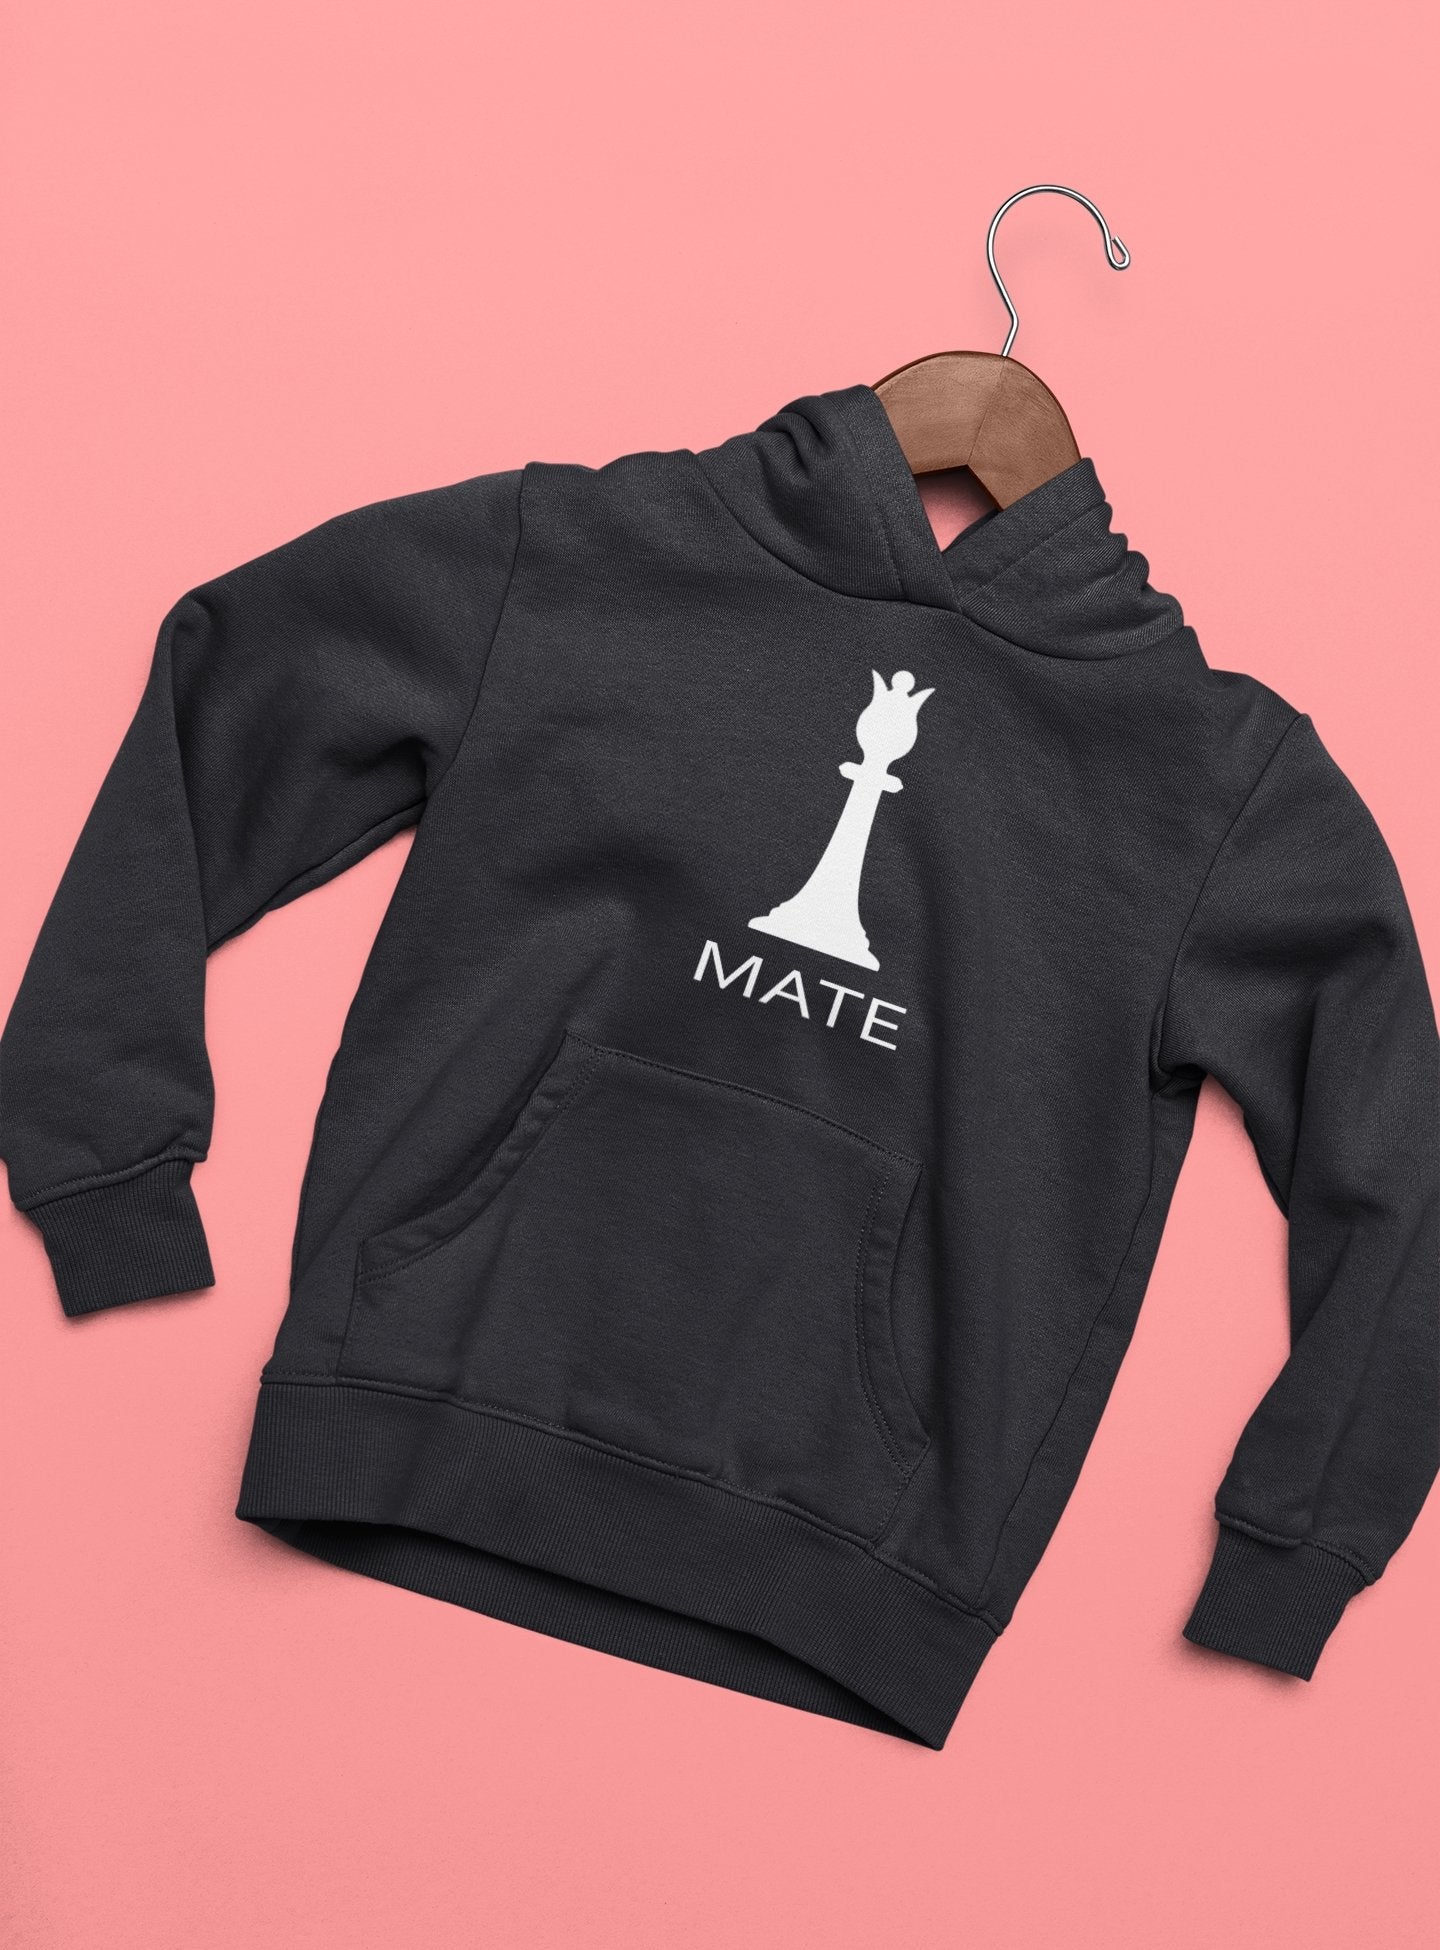 Check Mate Couple Hoodie-FunkyTradition